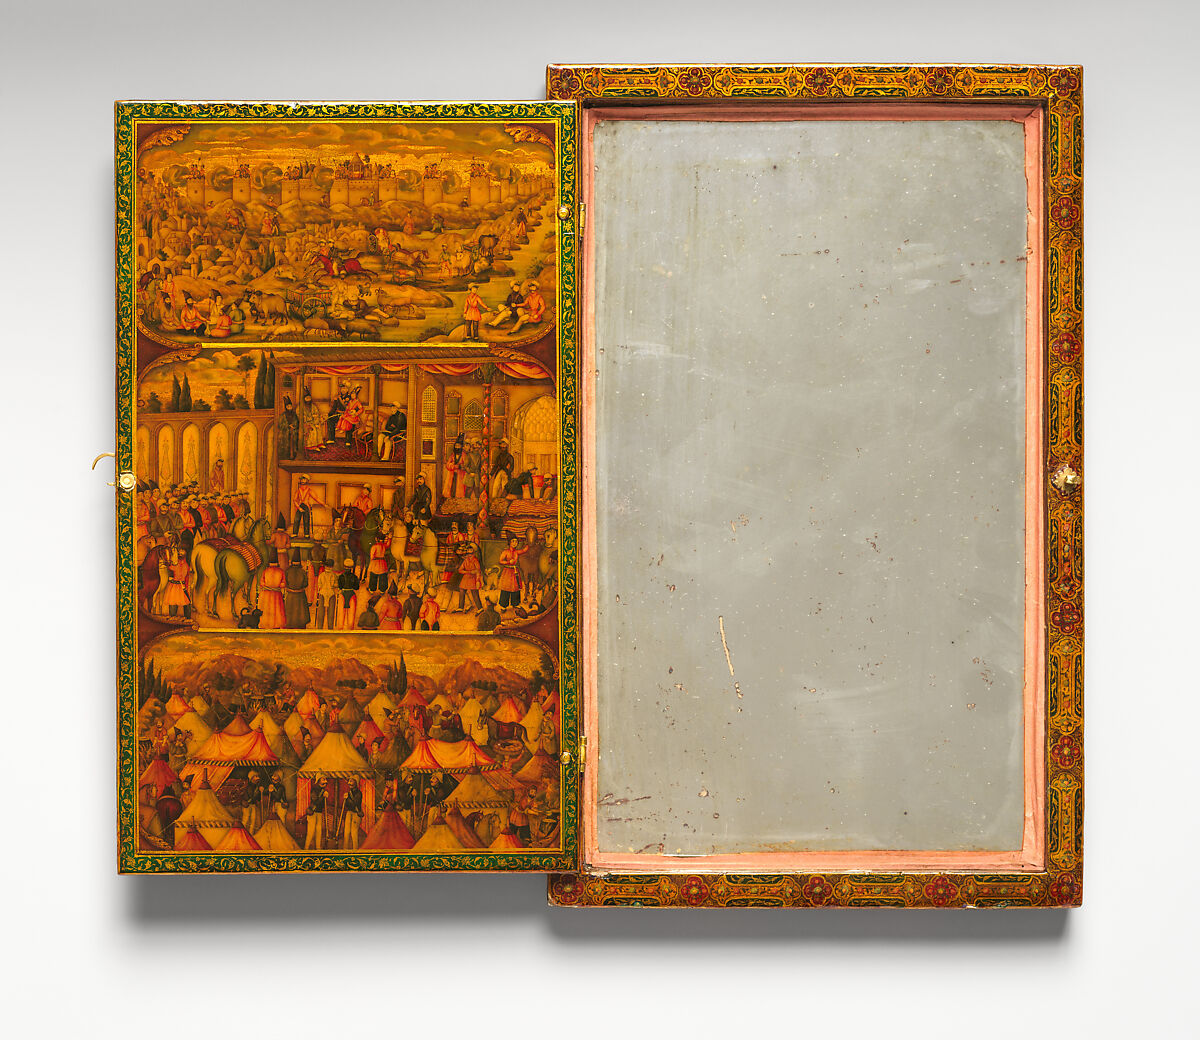 Mirror Case Depicting the Meeting of Nasir al-Din Mirza and Tsar Nicholas I in Erivan and Satin Pouch, Muhammad Isma'il Isfahani  Iranian, a) Pasteboard, opaque color, watercolor, gold under a lacquer varnish<br/>b) Satin pouch with metal wrapped embroidery